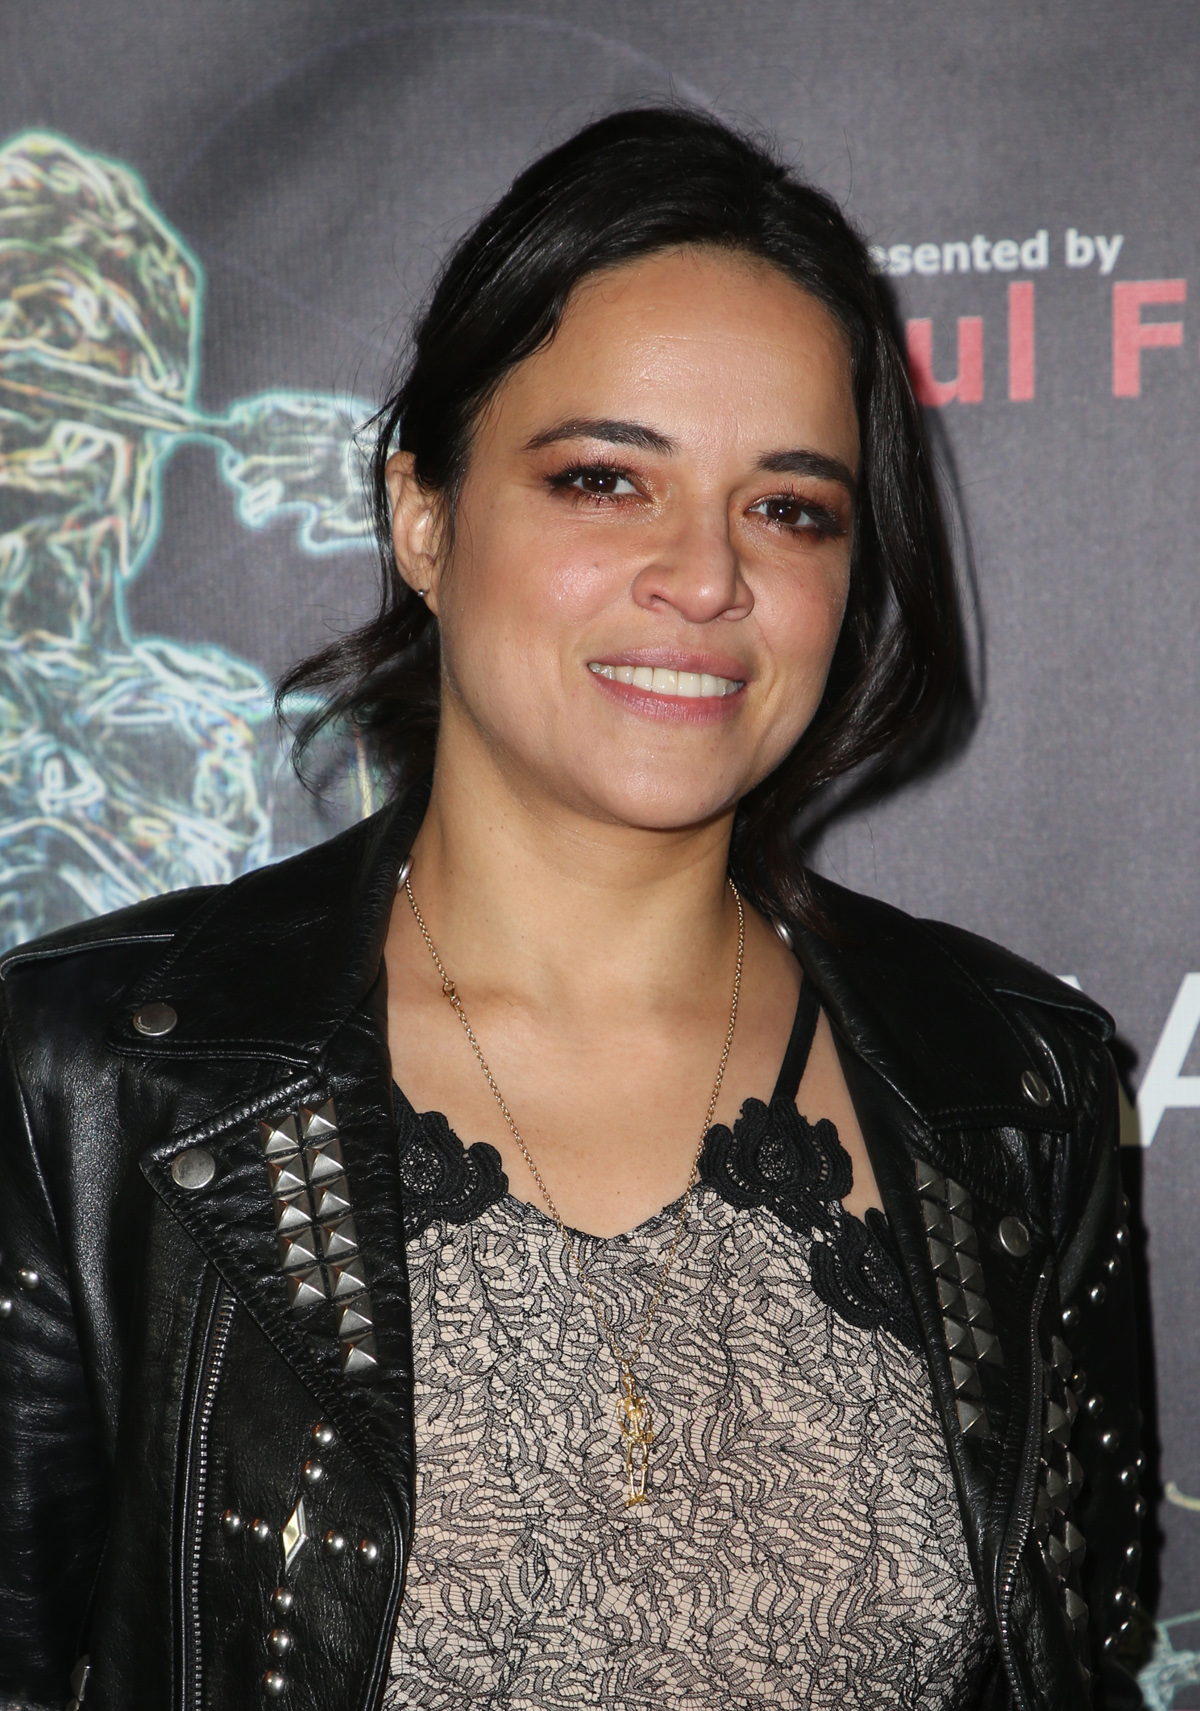 BEVERLY HILLS, CA - APRIL 26: Michelle Rodriguez, at the 2018 Artemis Awards Gala at the Ahrya Fine Arts Theater in Beverly Hills, California on April 26, 2018. Credit: Faye Sadou/MediaPunch